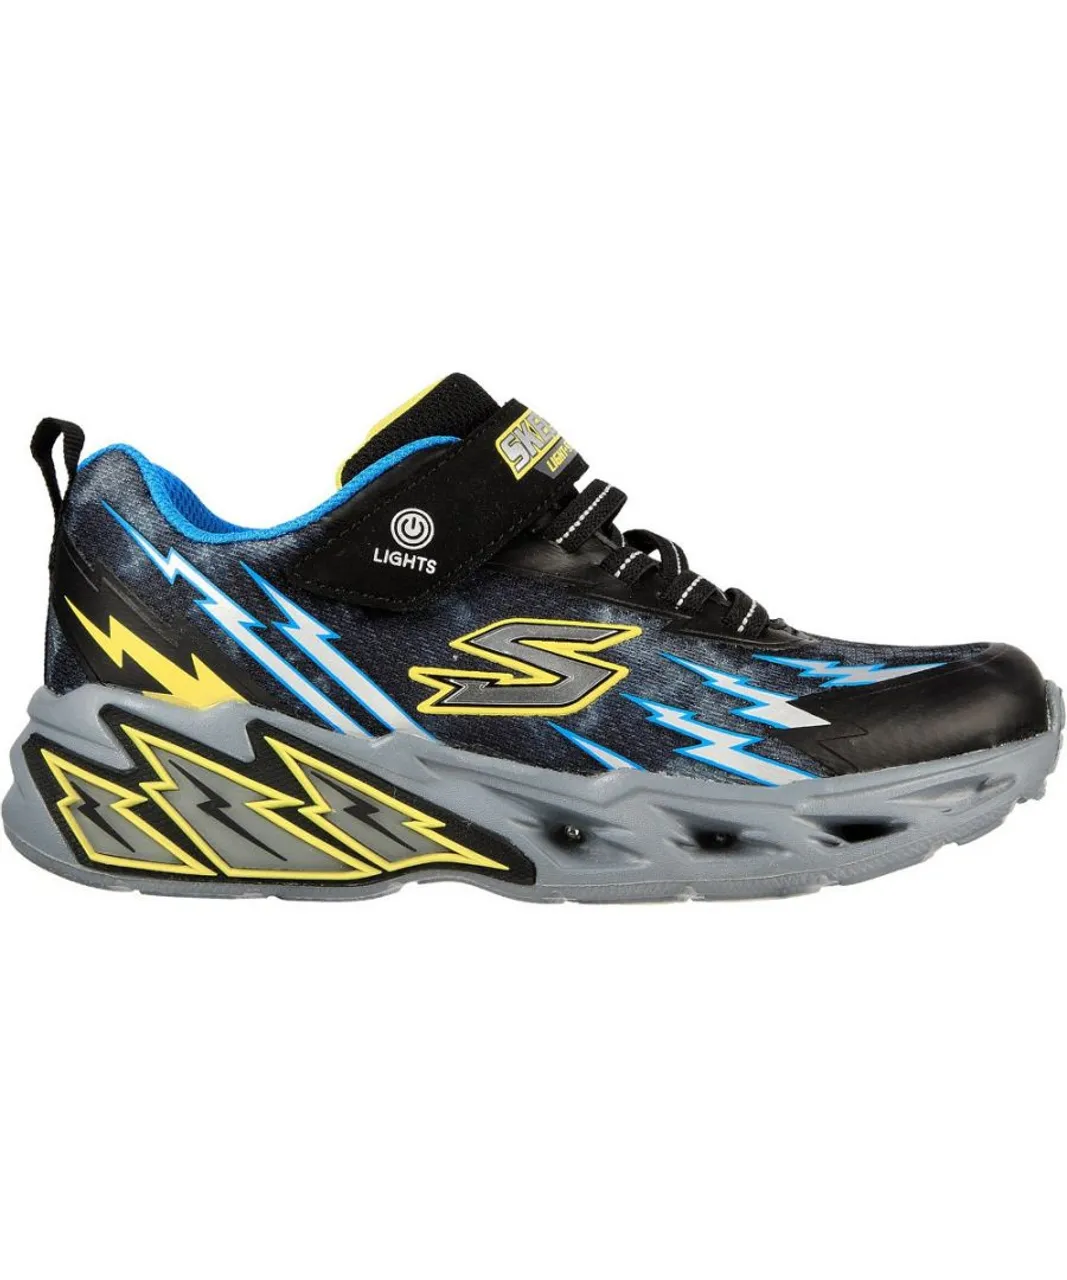 Skechers Boys Light Storm 2.0 Trainers Junior - Black Mixed Material